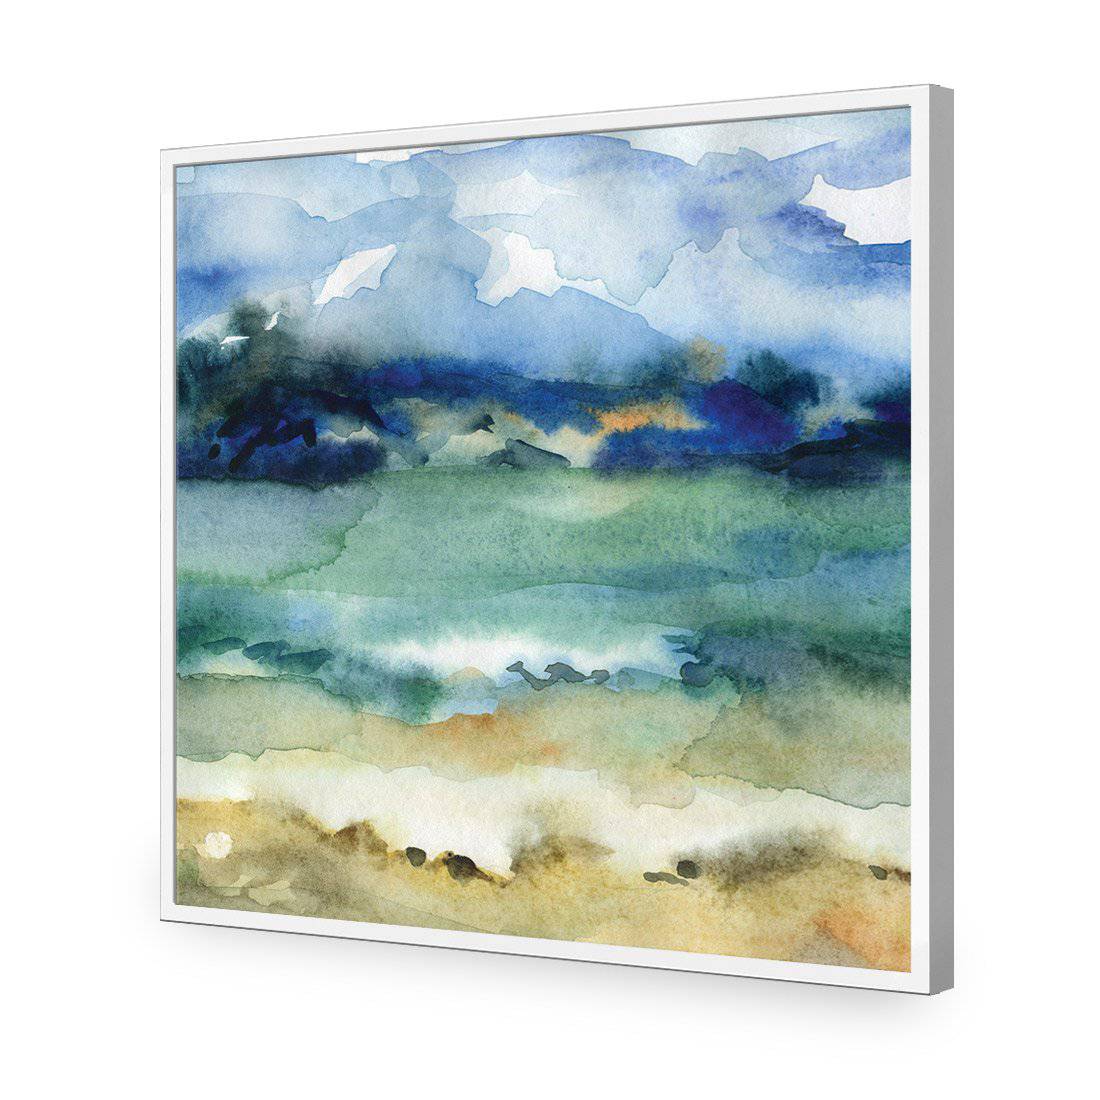 Timeless, Square-Acrylic-Wall Art Design-Without Border-Acrylic - White Frame-37x37cm-Wall Art Designs